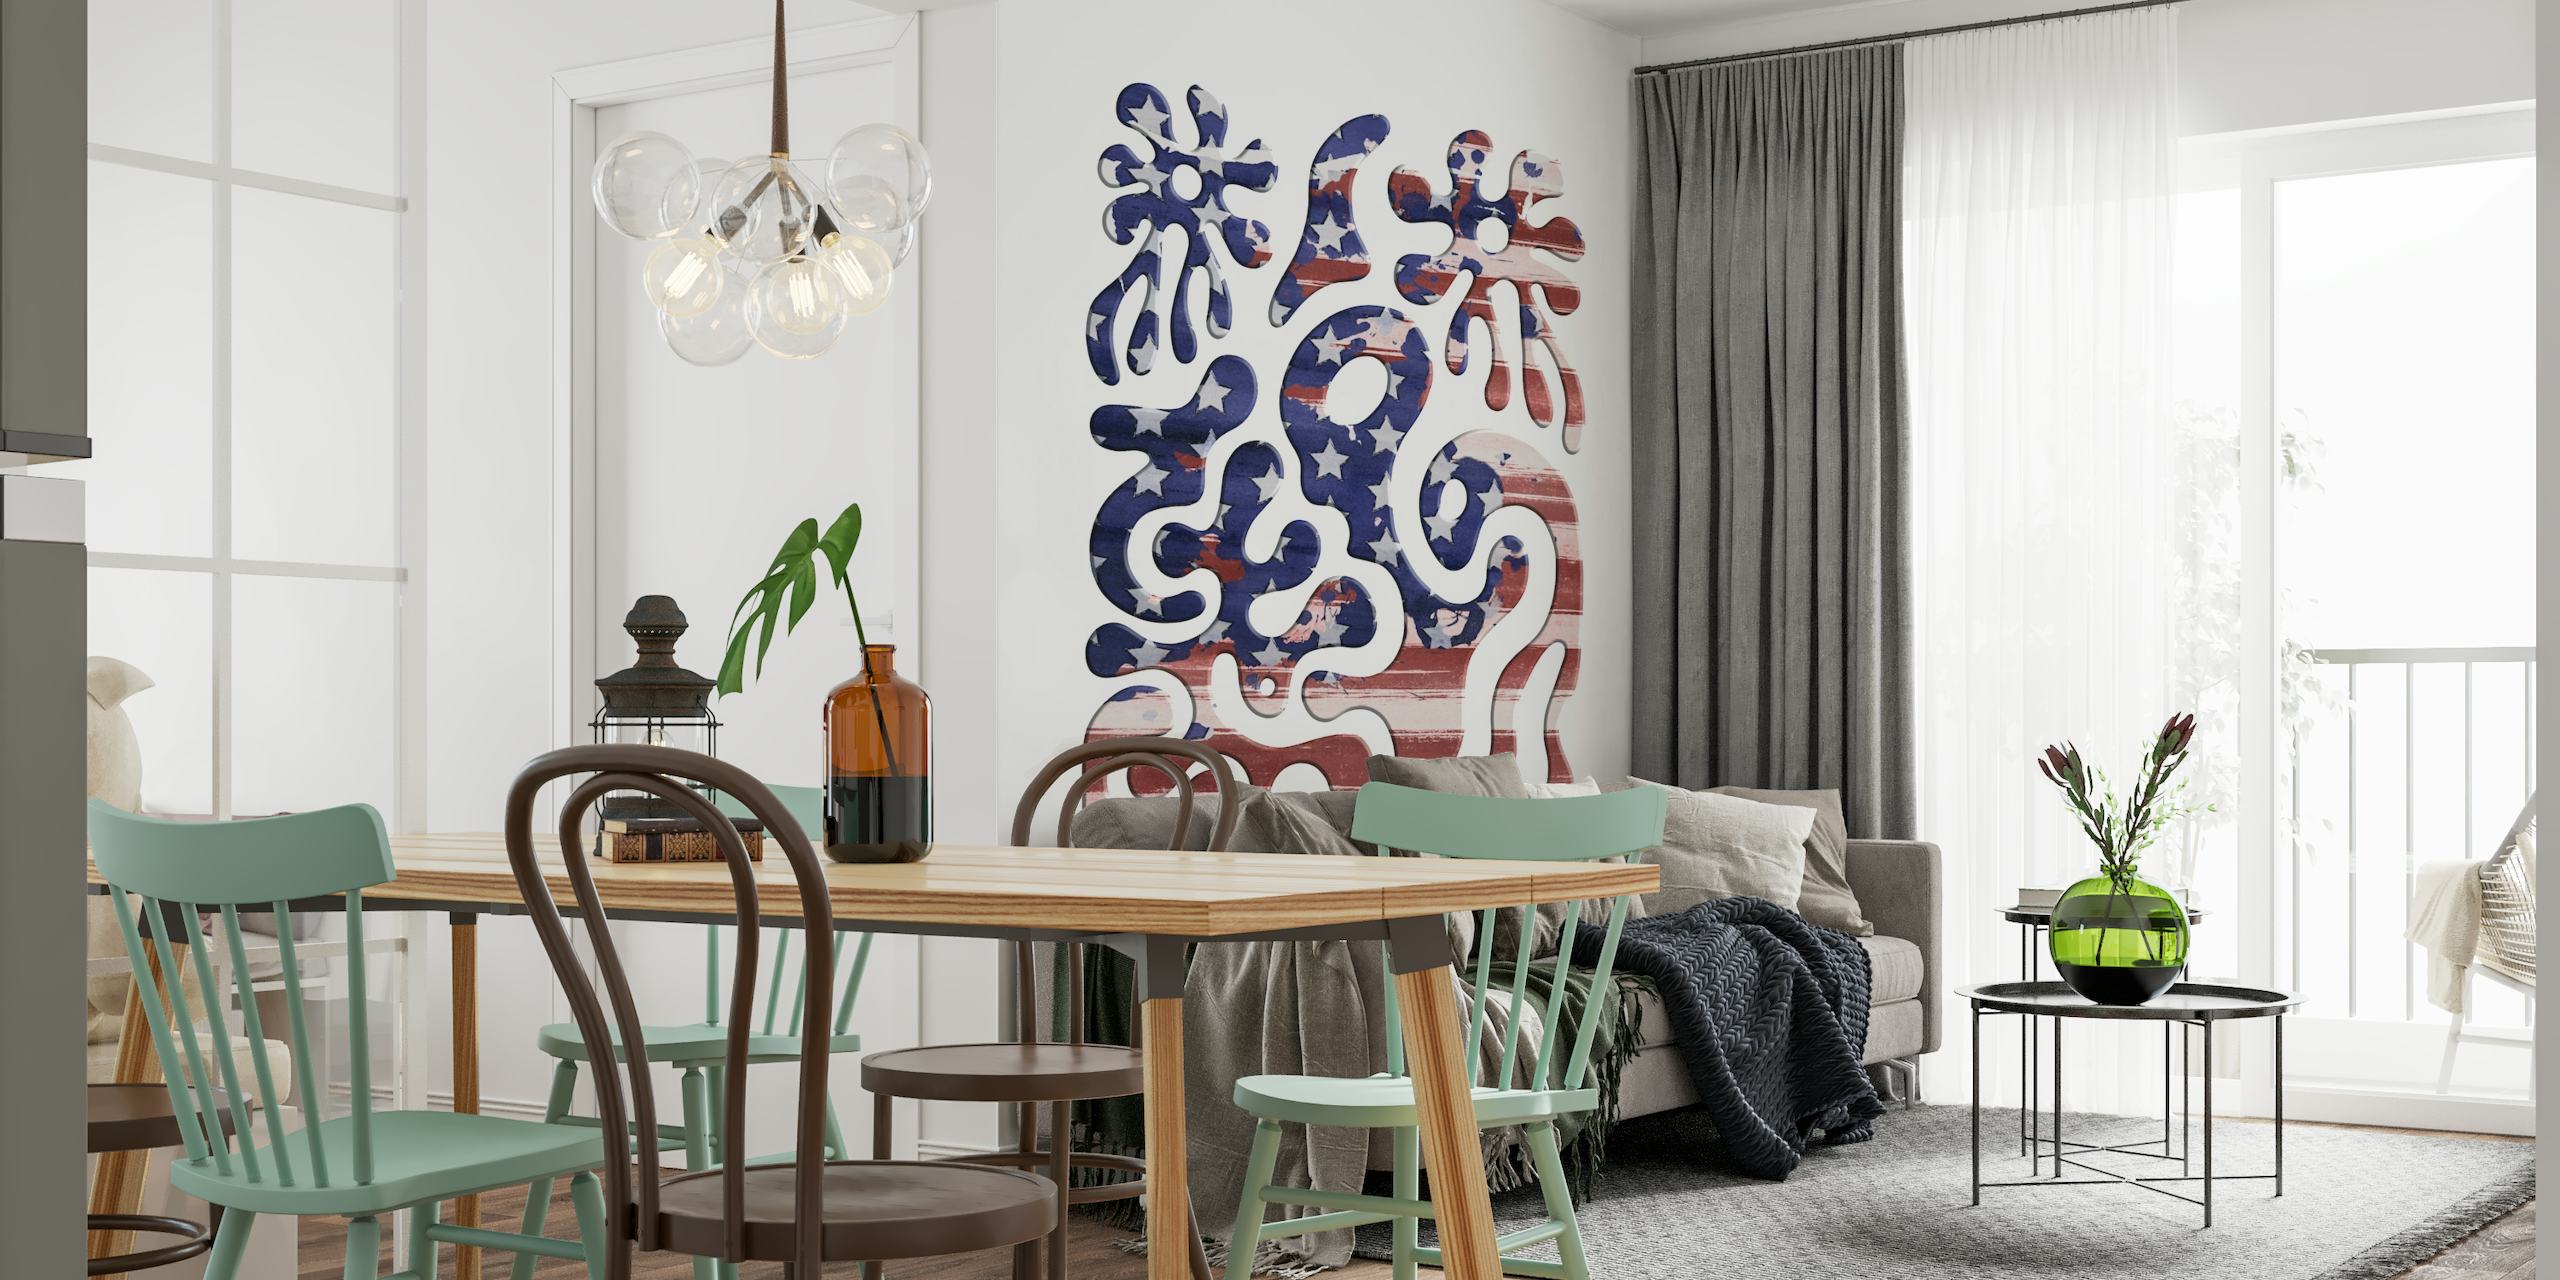 Abstract wall mural featuring cosmic-inspired abstract patterns in shades of blue and red.